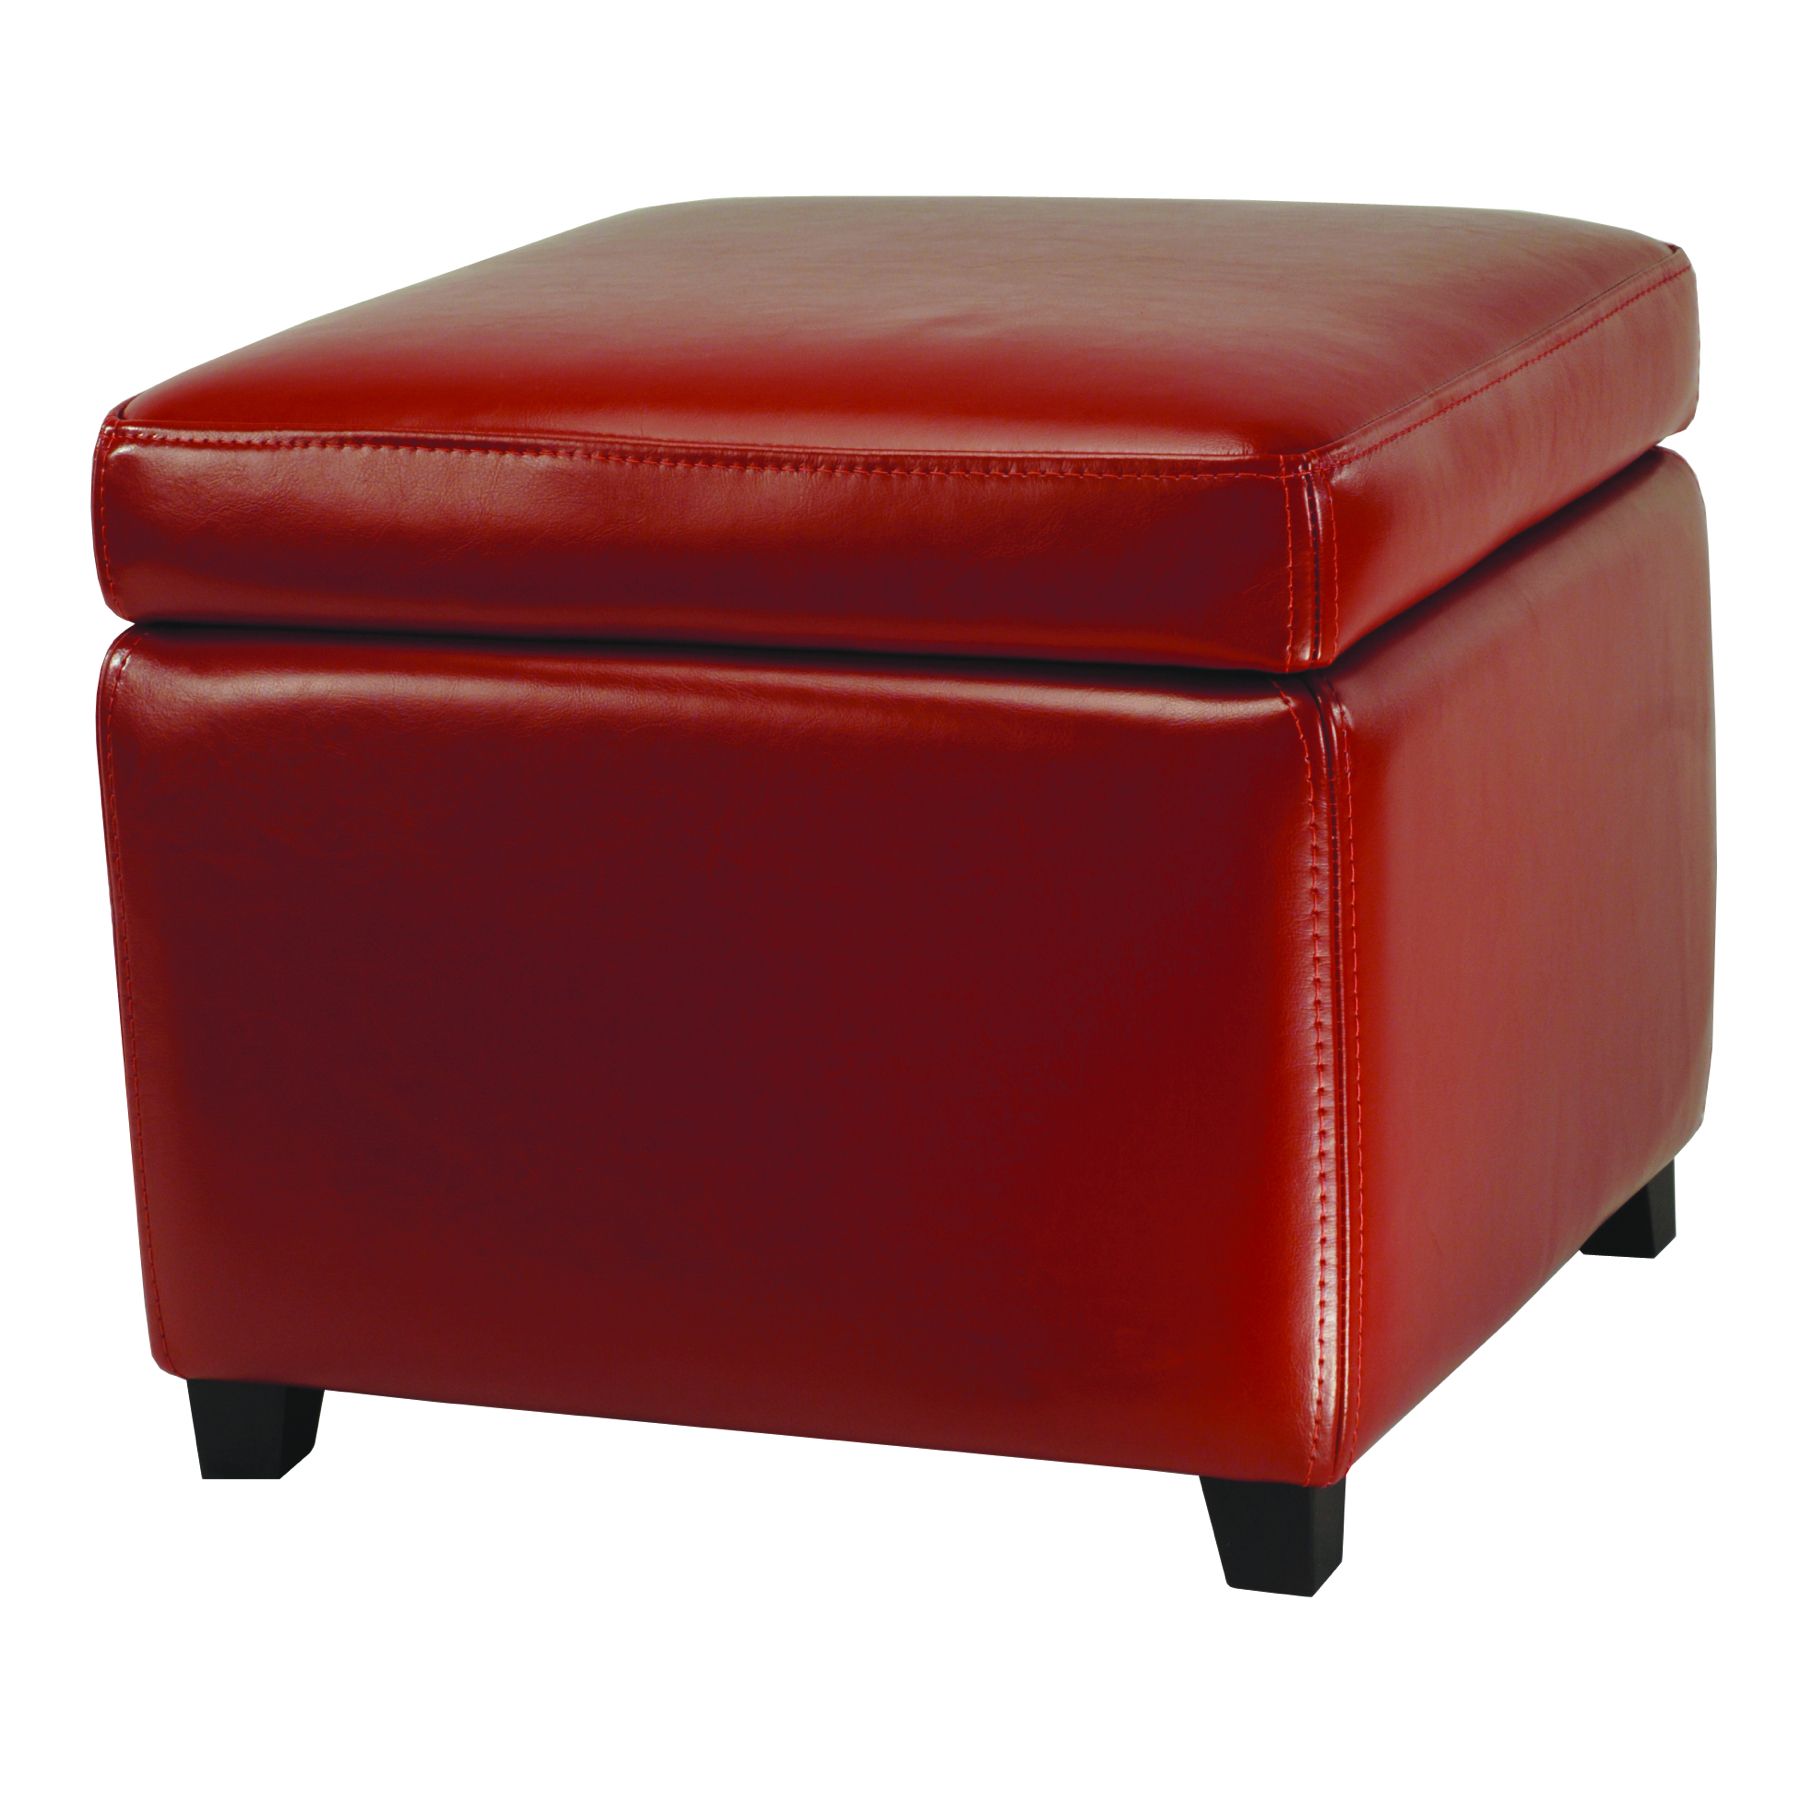 Widely Used Small Leather Ottoman Cube – Ideas On Foter For Solid Cuboid Pouf Ottomans (View 2 of 10)